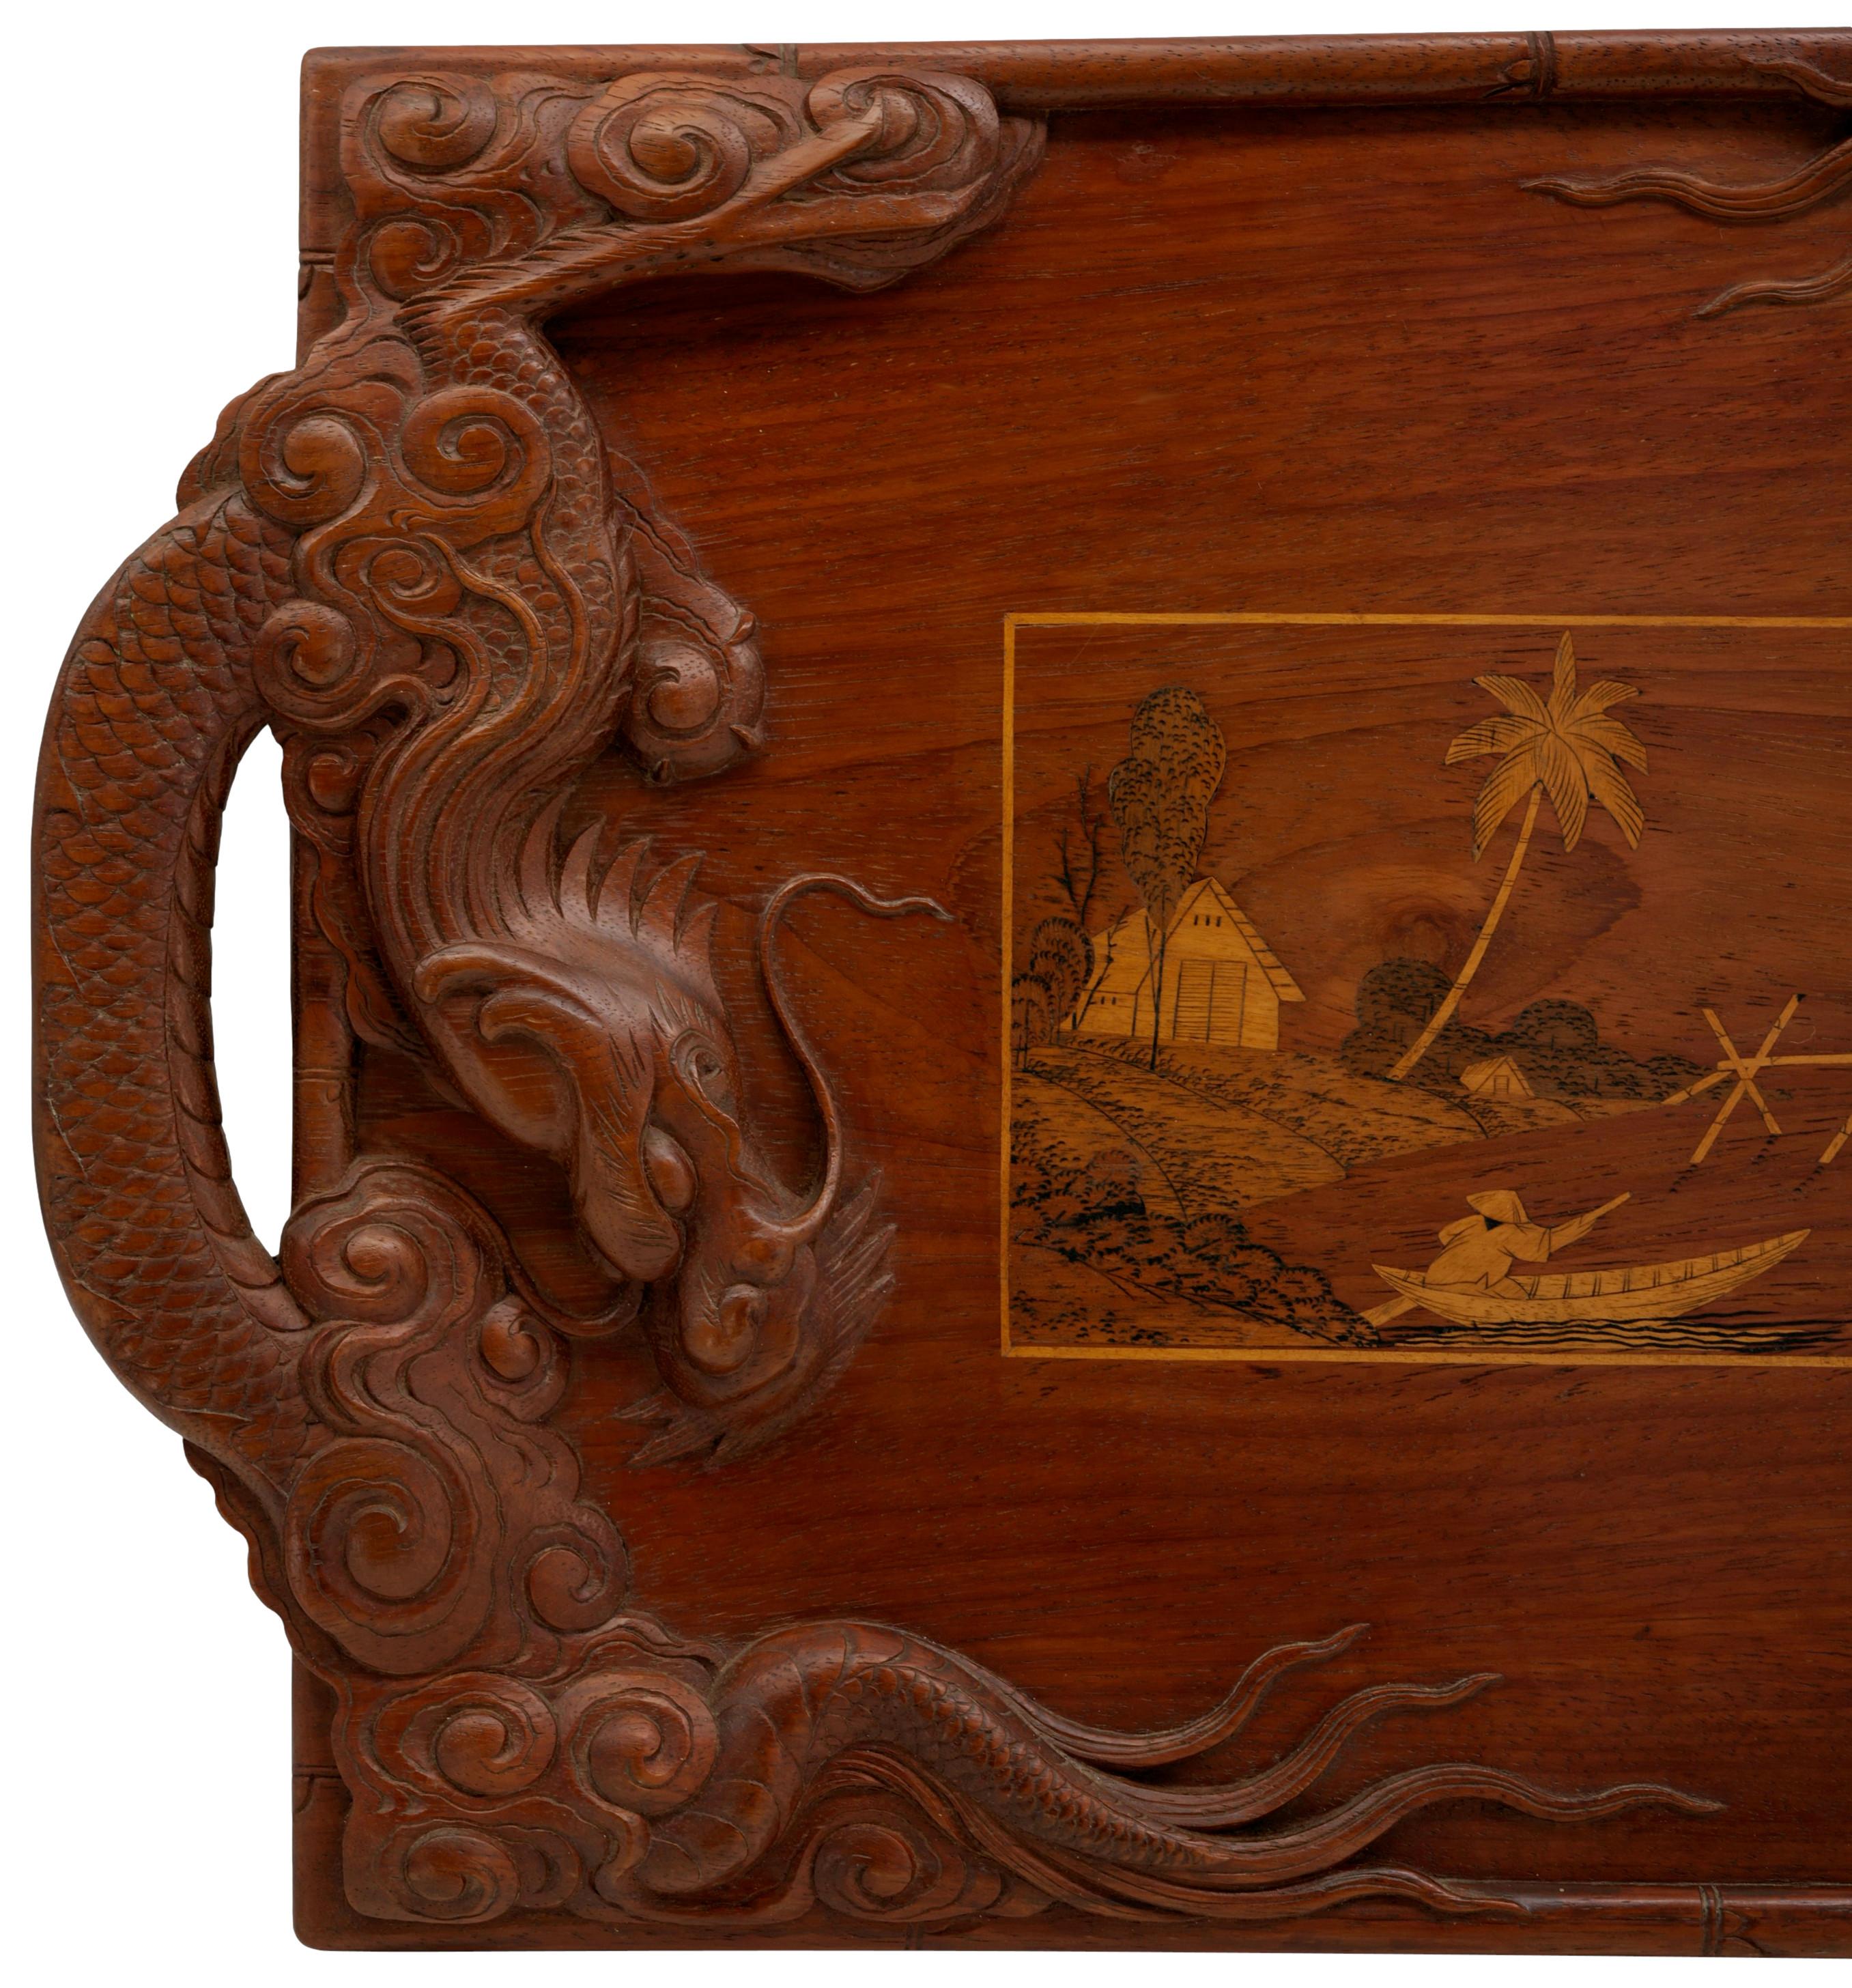 French colonial dragon tray, late 19th - early 20th. Carved and inlaid wood. Two remarkably carved and chiseled dragons forming handles, and a central reserve showing a delicately inlaid Asian scene. Measures: Width : 23.6